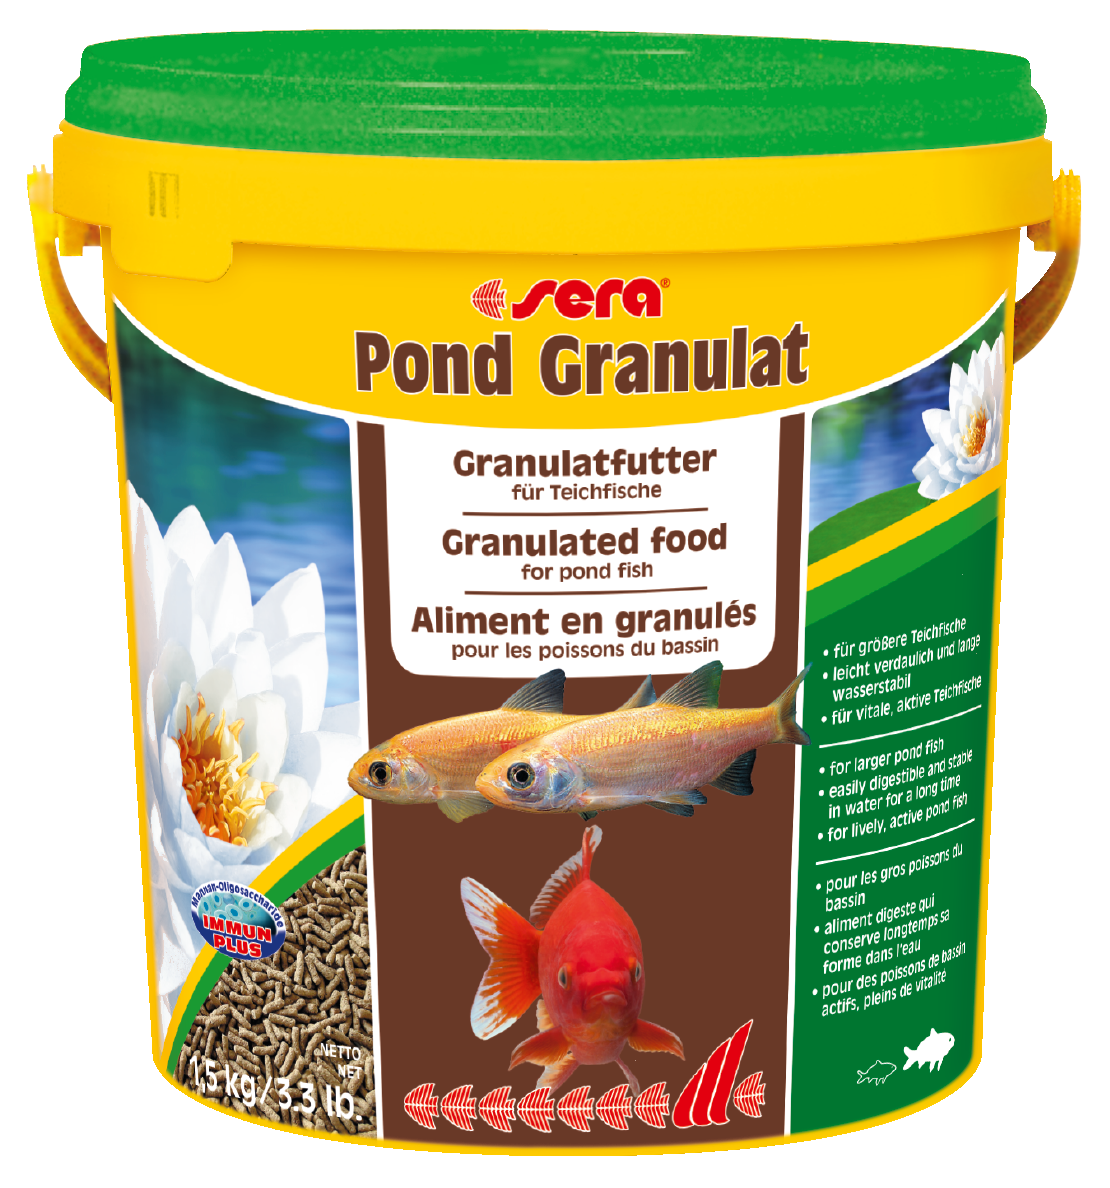 Fischfutter "Pond" Granulat 1.5 kg + product picture